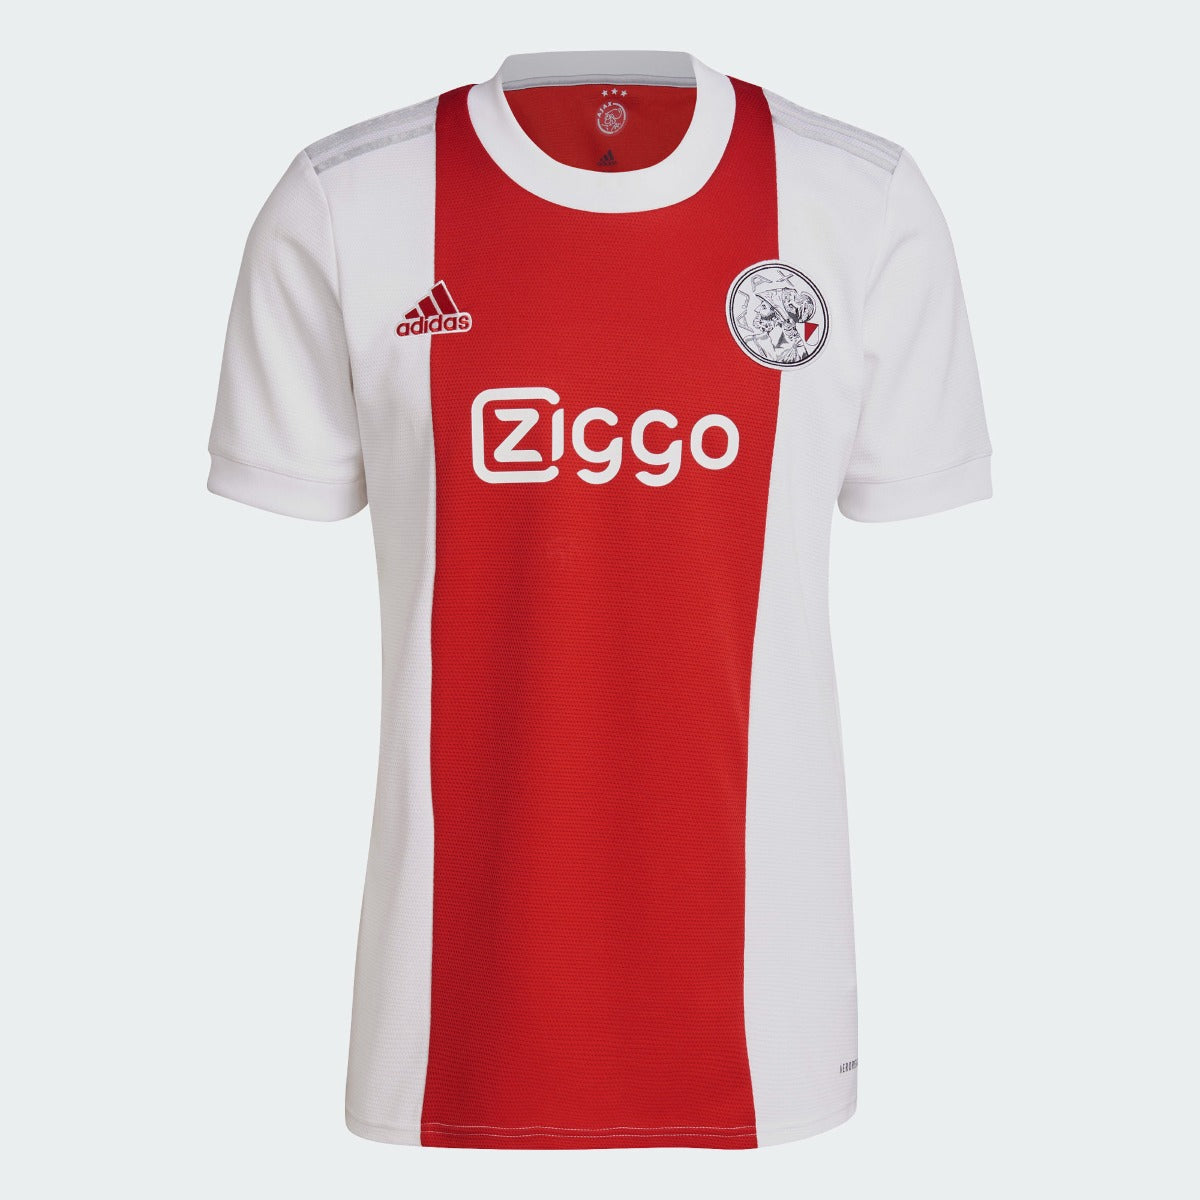 Adidas 2021-22 Ajax Home Jersey - Red-White (Front)